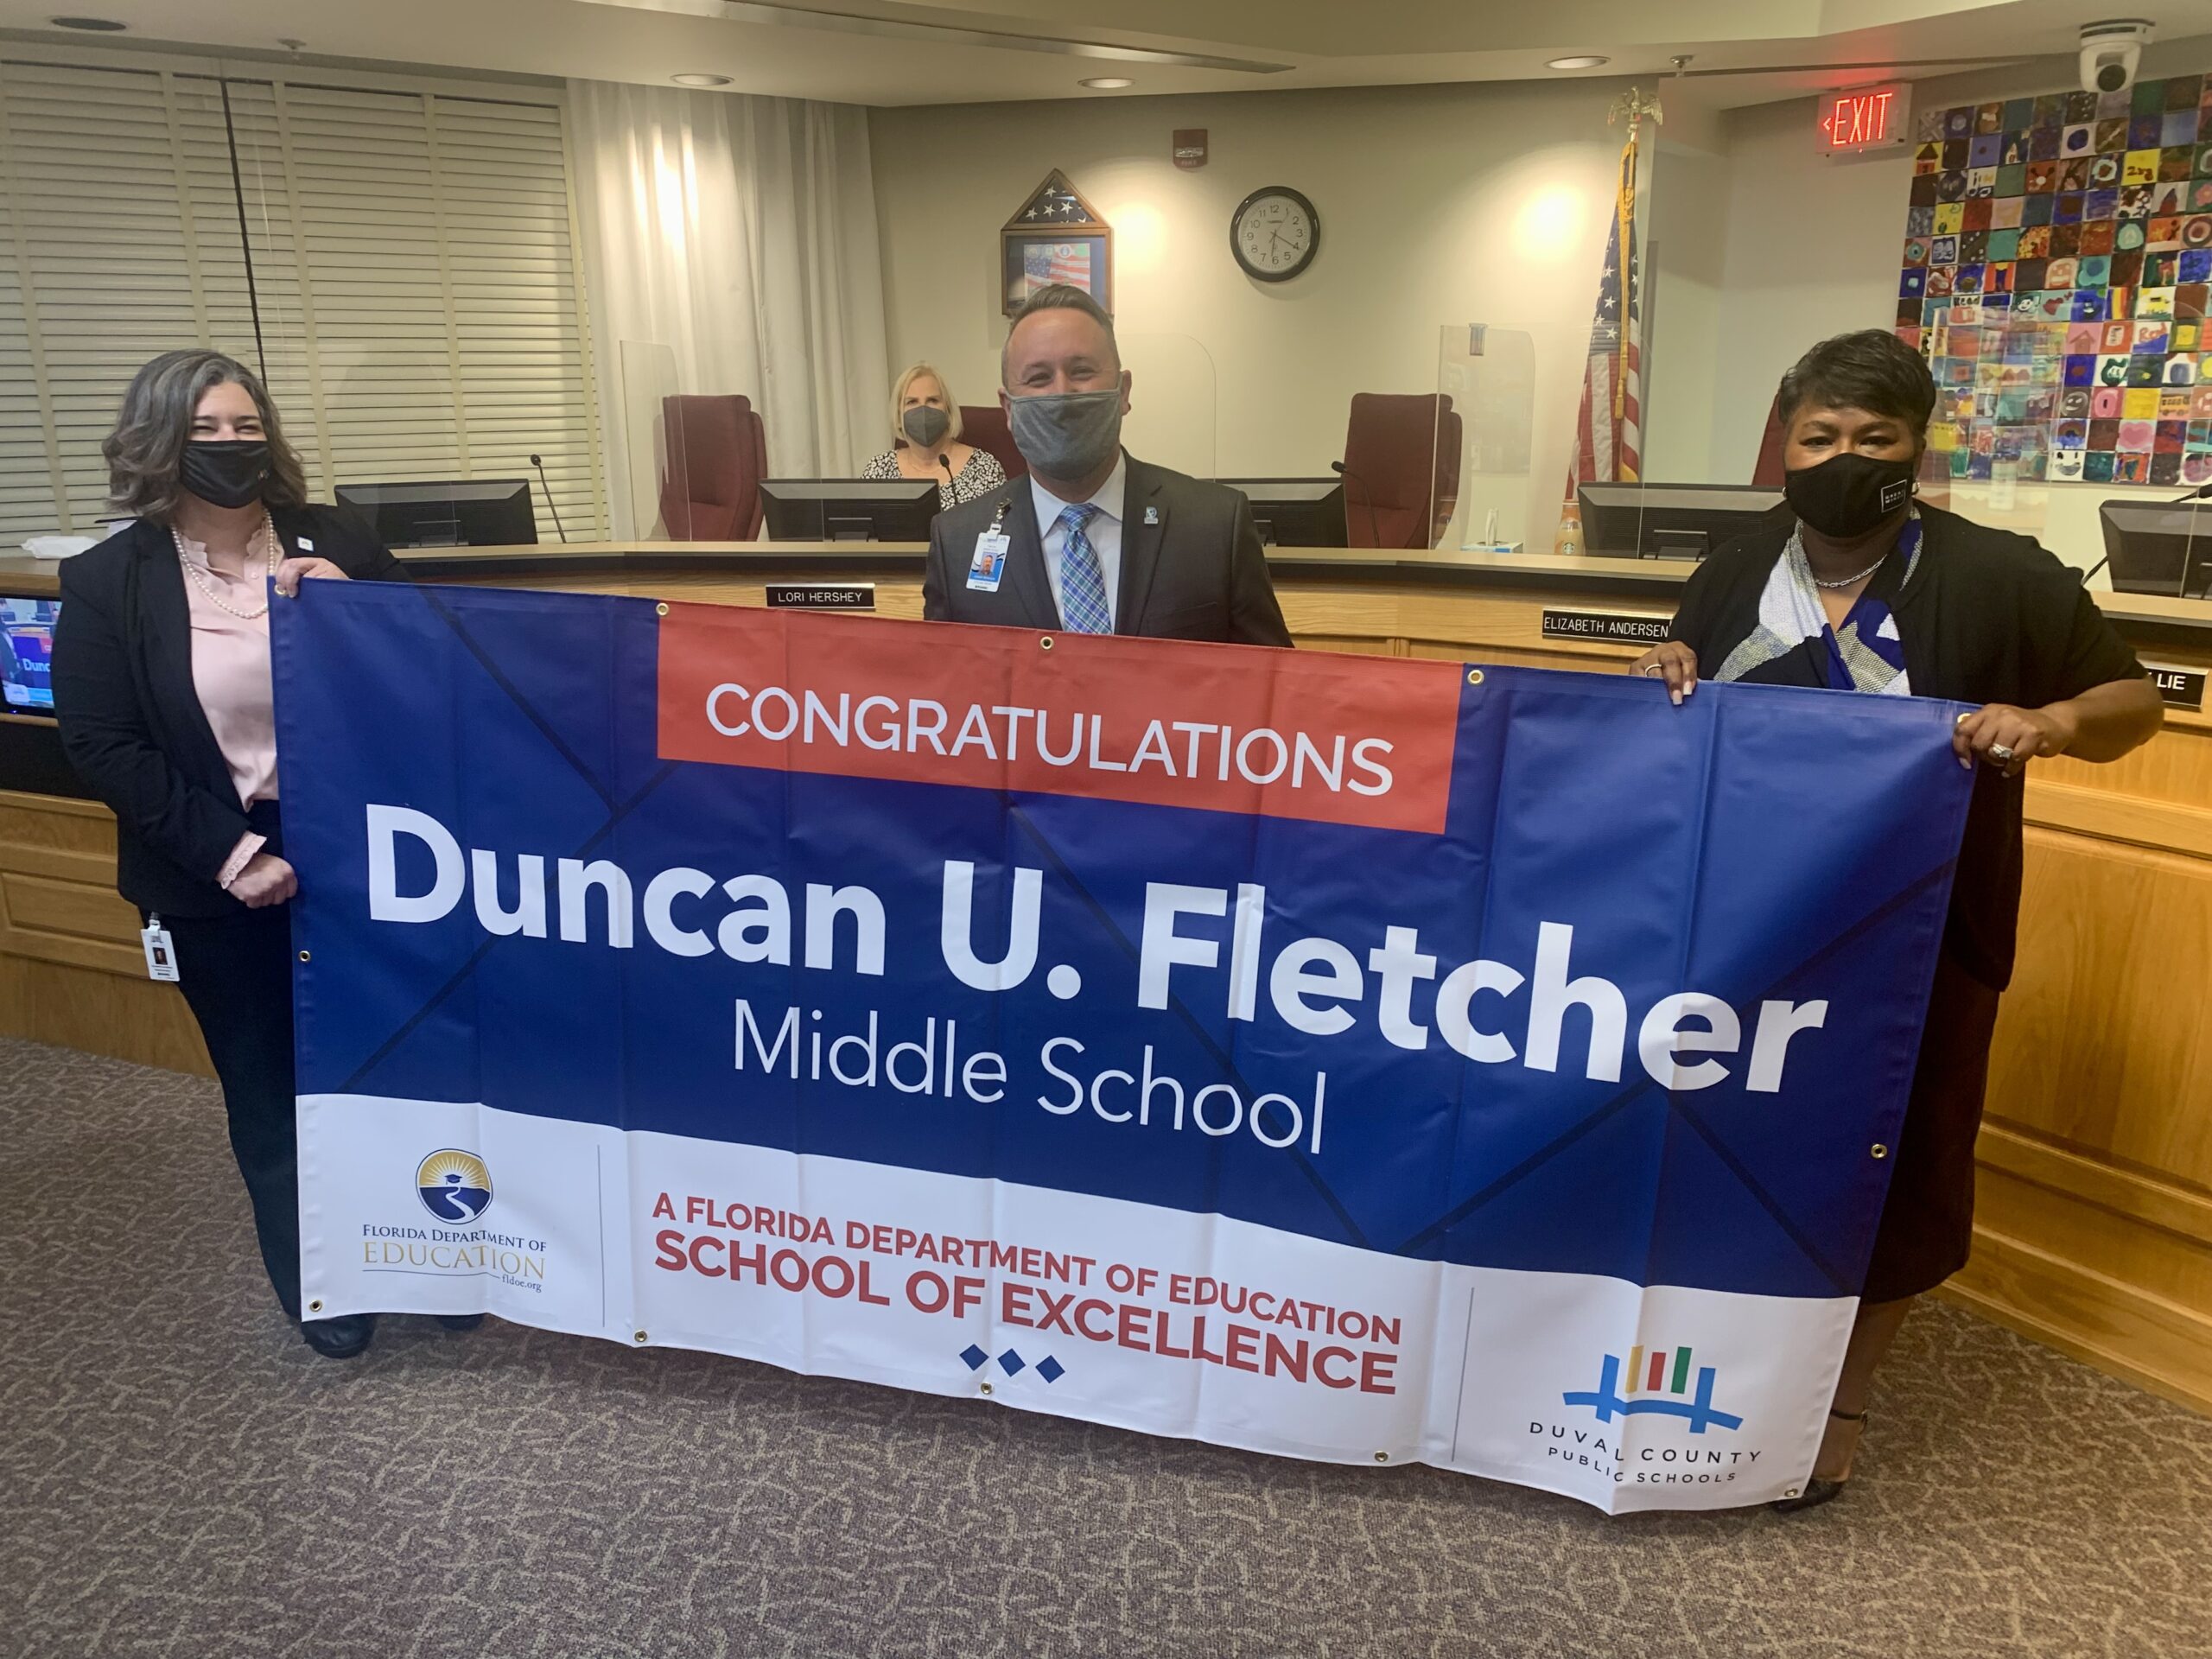 Superintendent, Board Member and school administrator hold banner Congratulations Duncan U. Fletcher Middle School a Florida Department of Education School of Excellence